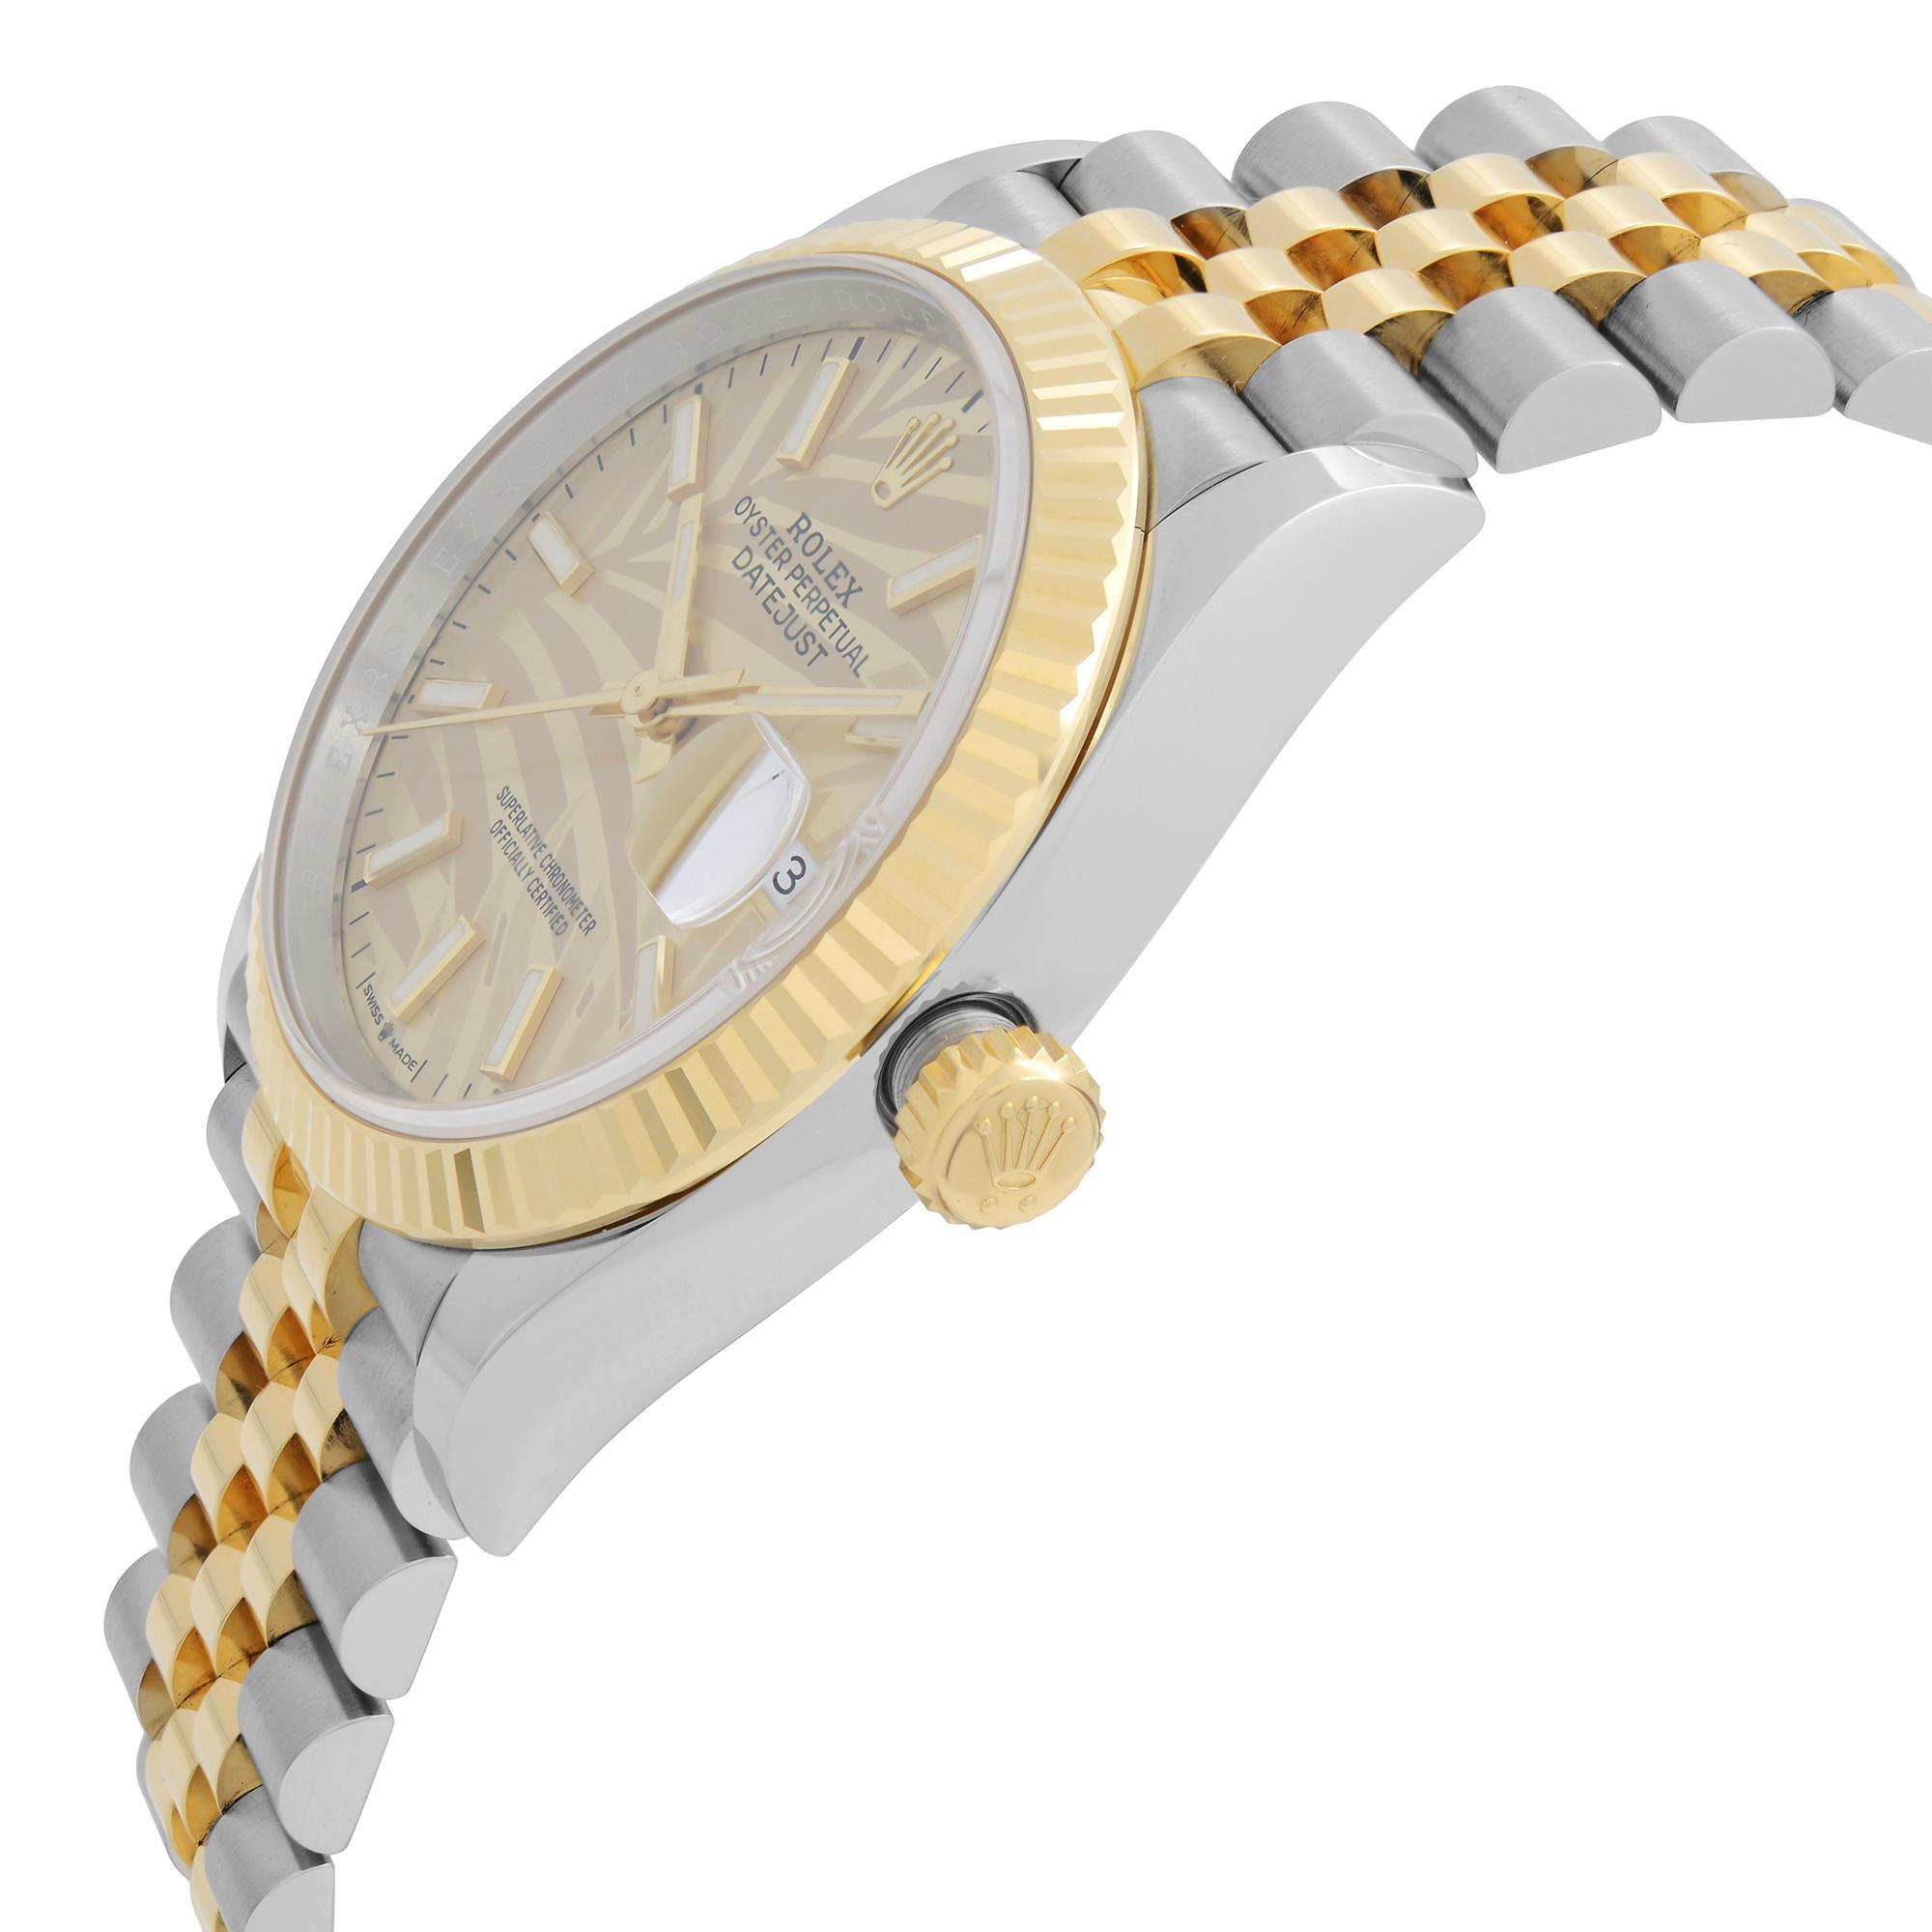 NEW Rolex Datejust 18K Yellow Gold Steel Champagne Motif Dial Watch 126333 For Sale 2